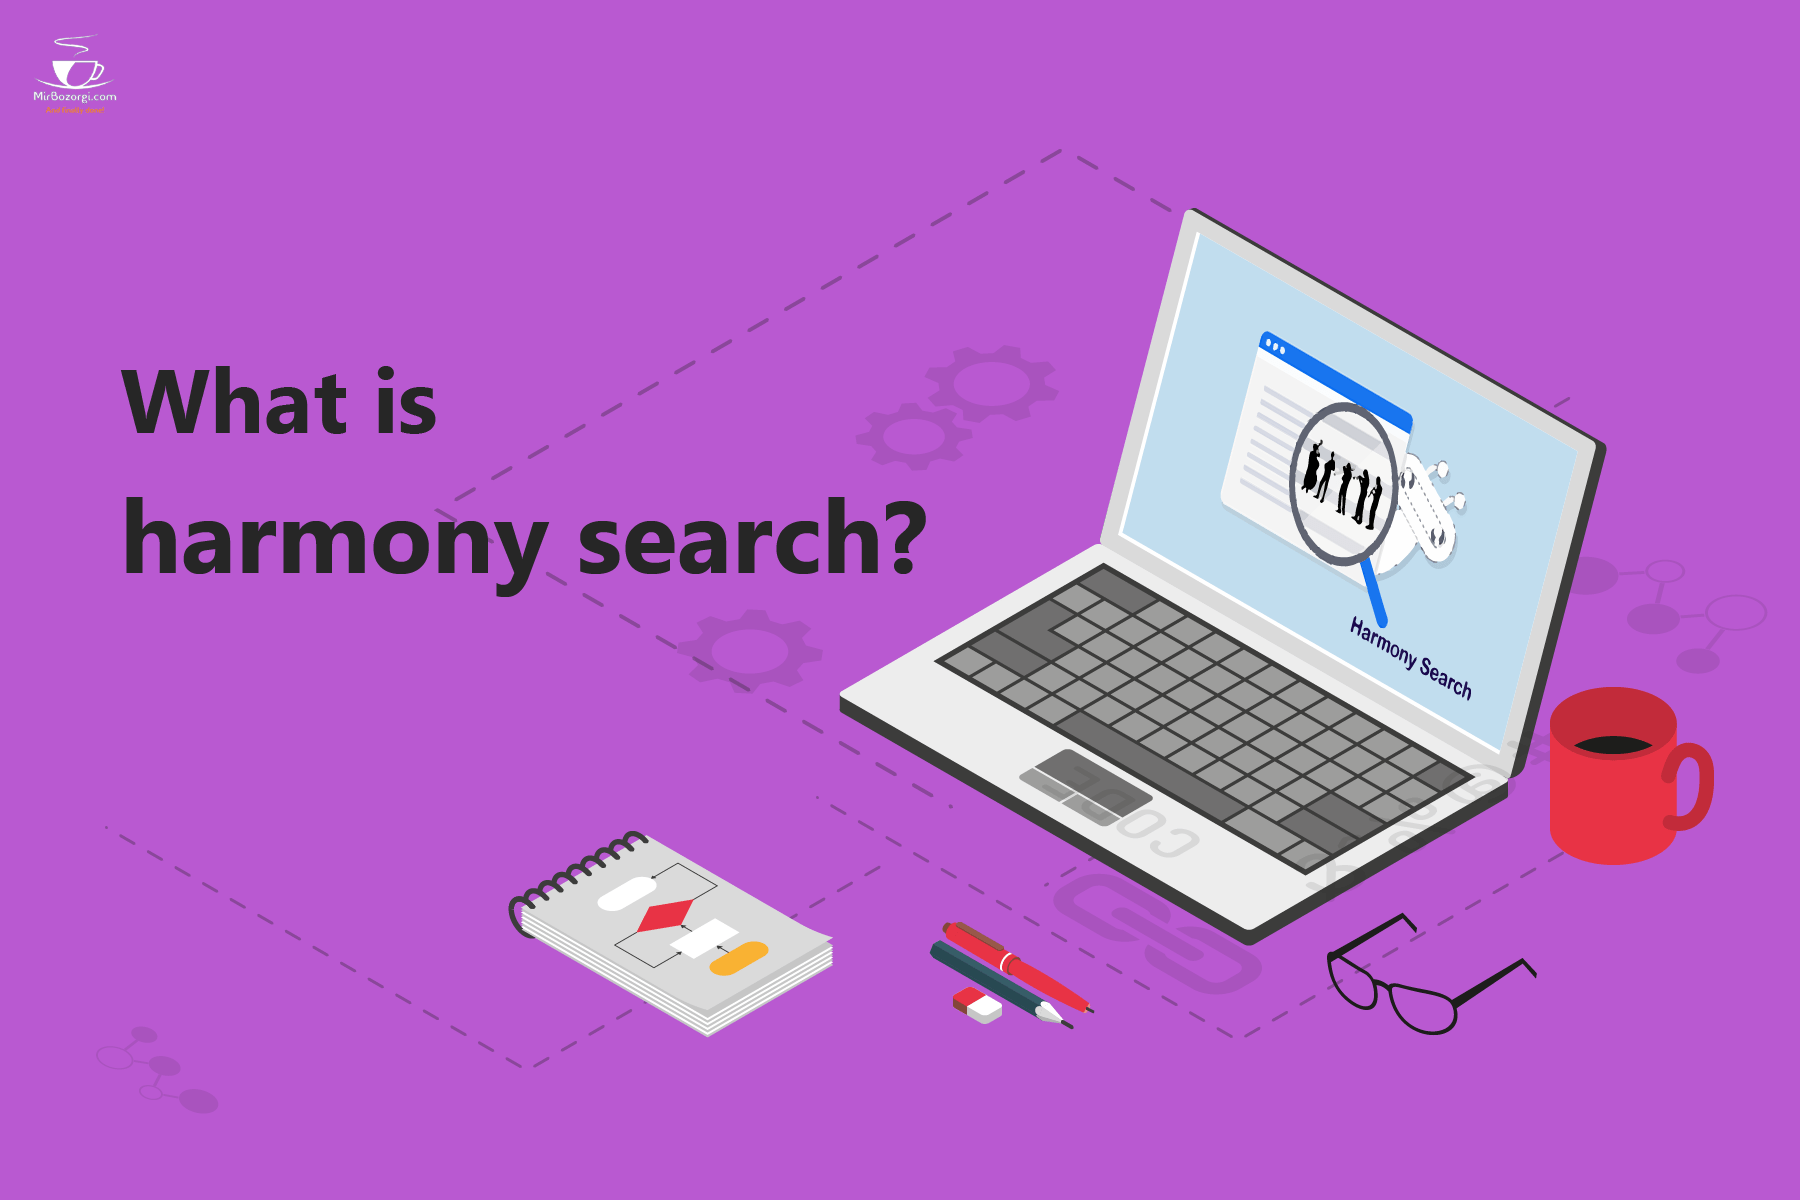 What is harmony search?